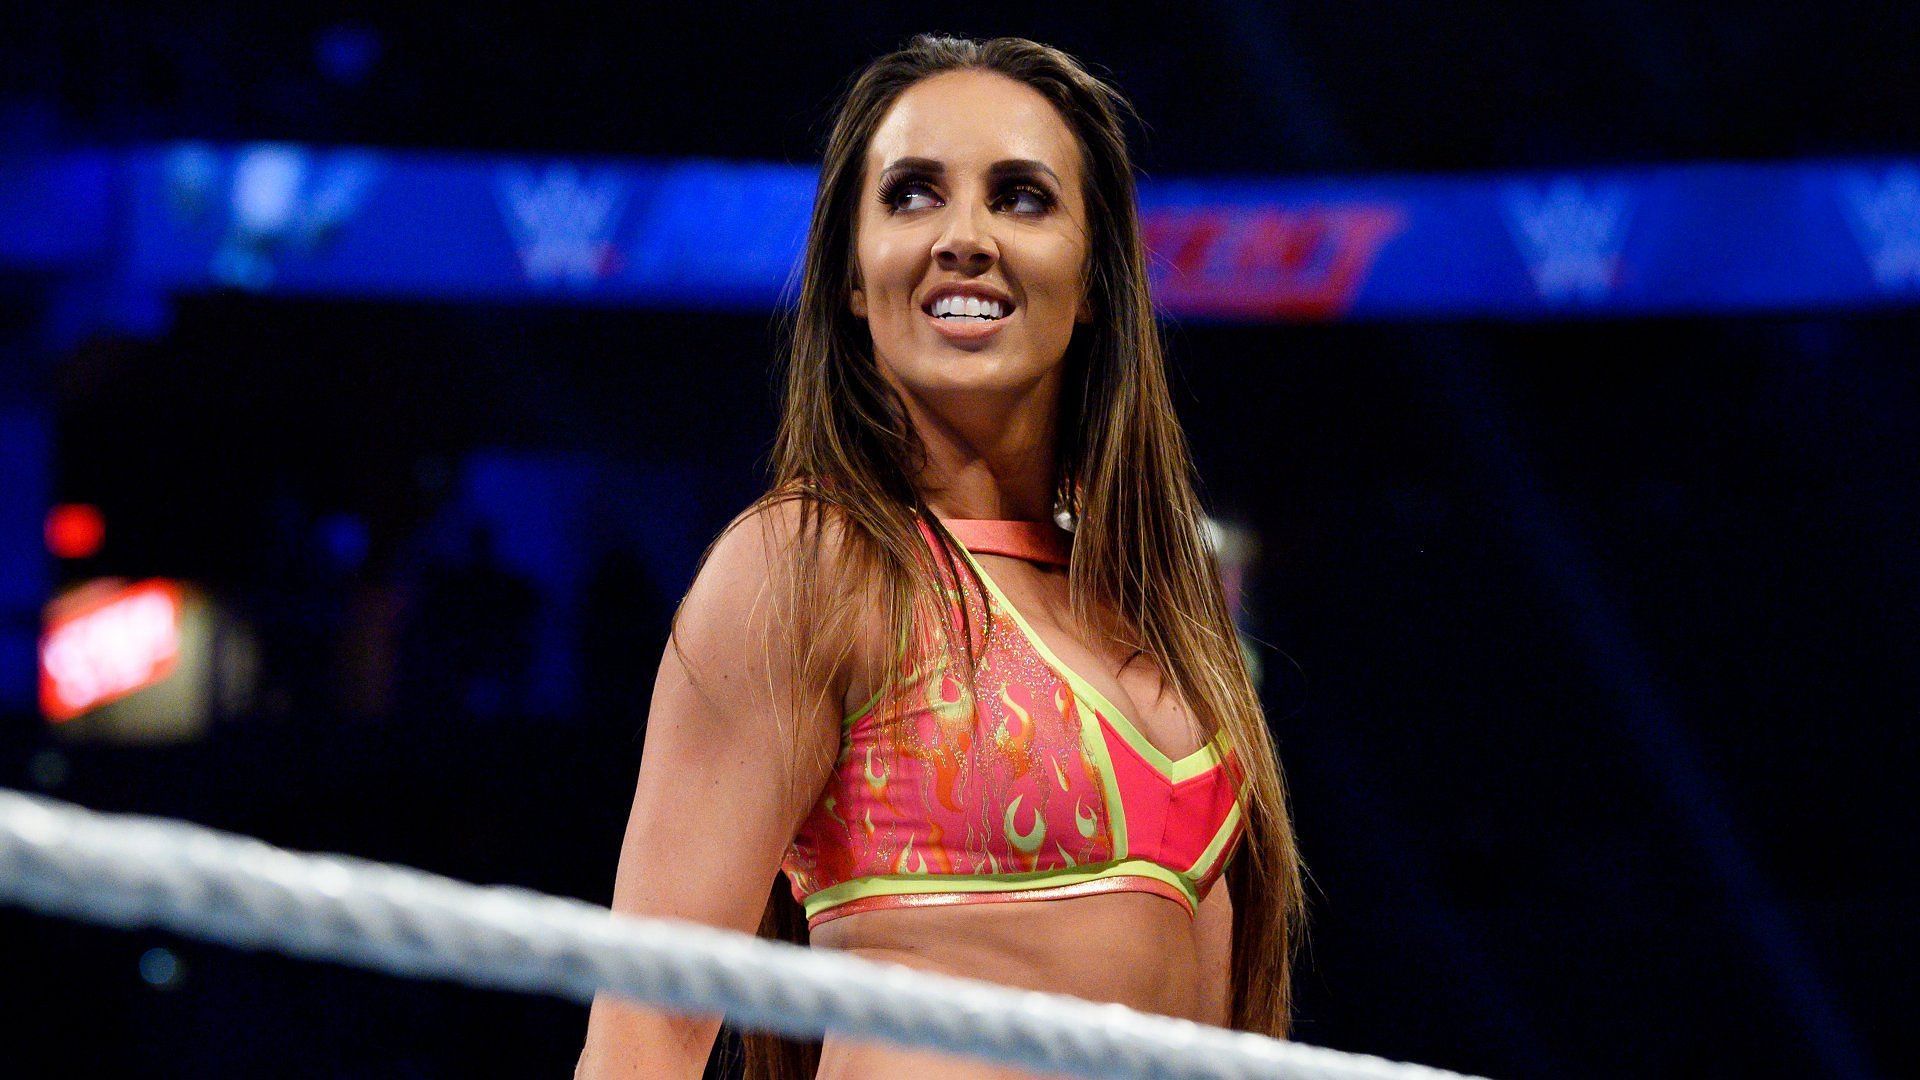 Chelsea Green Claims To Have Unfinished Business In The WWE Ahead of Rumored Return 1